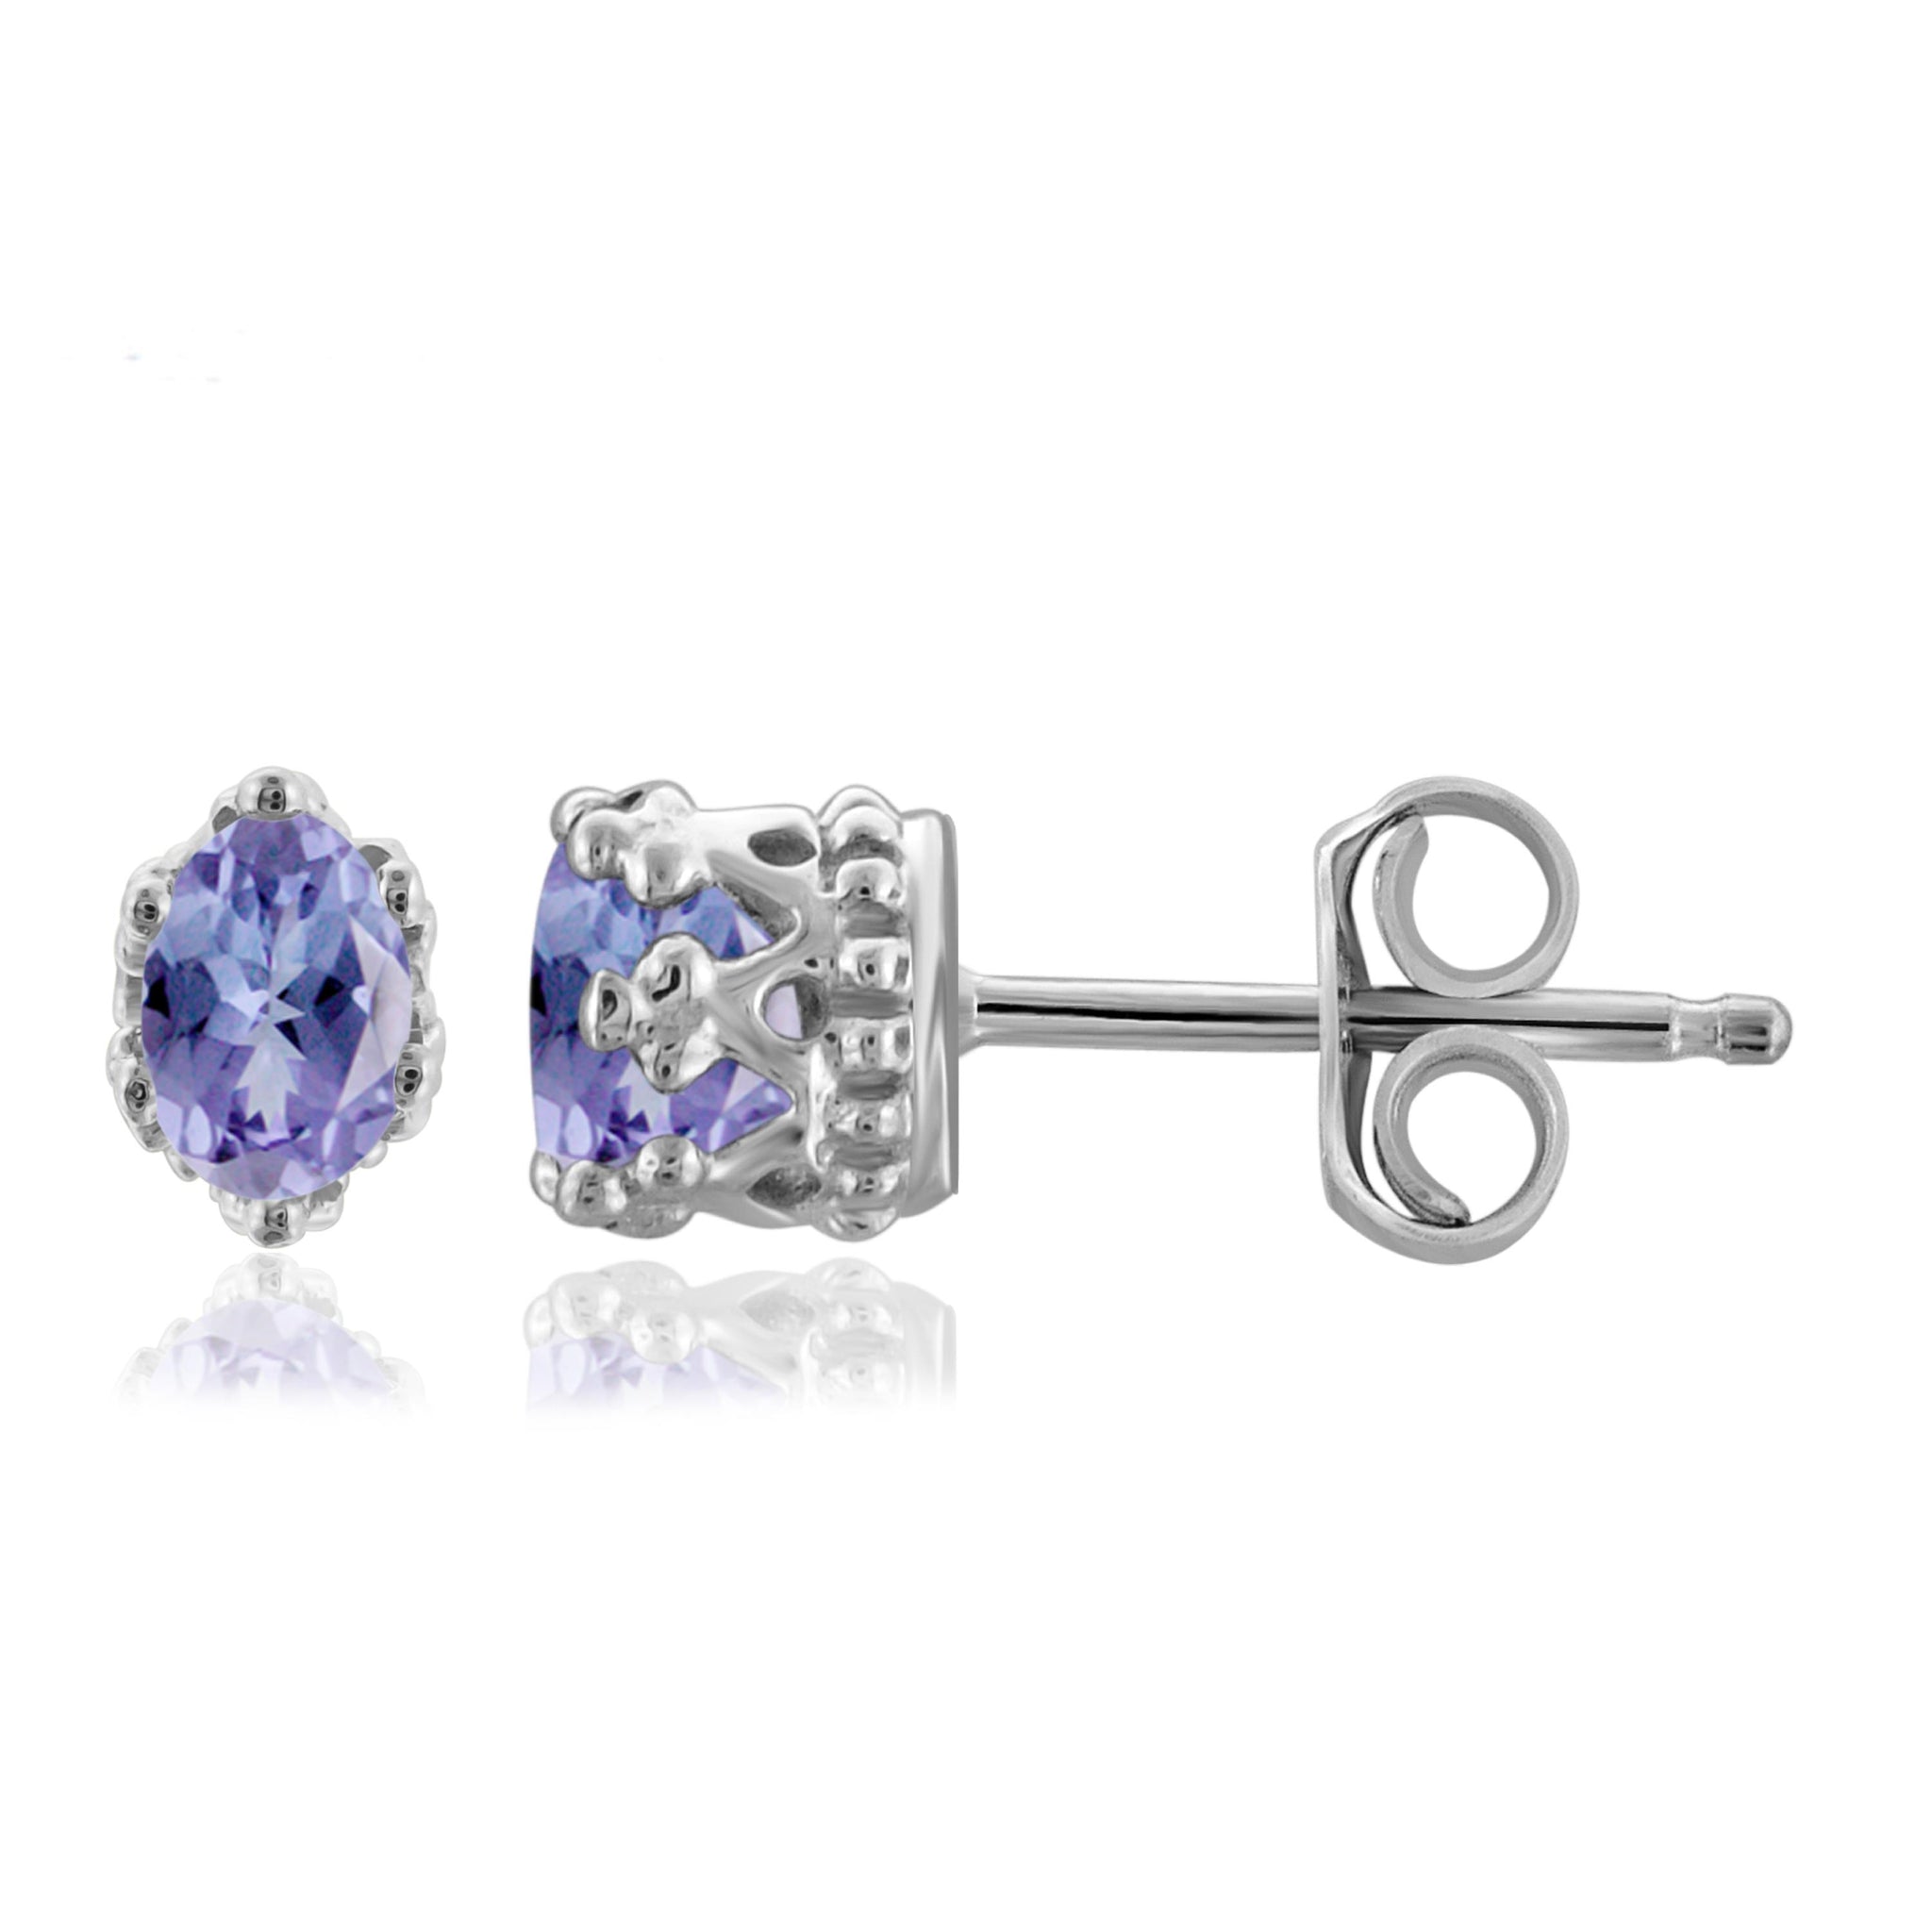 JewelonFire 0.45 Carat T.G.W. Tanzanite Sterling Silver Crown Earrings - Assorted Colors